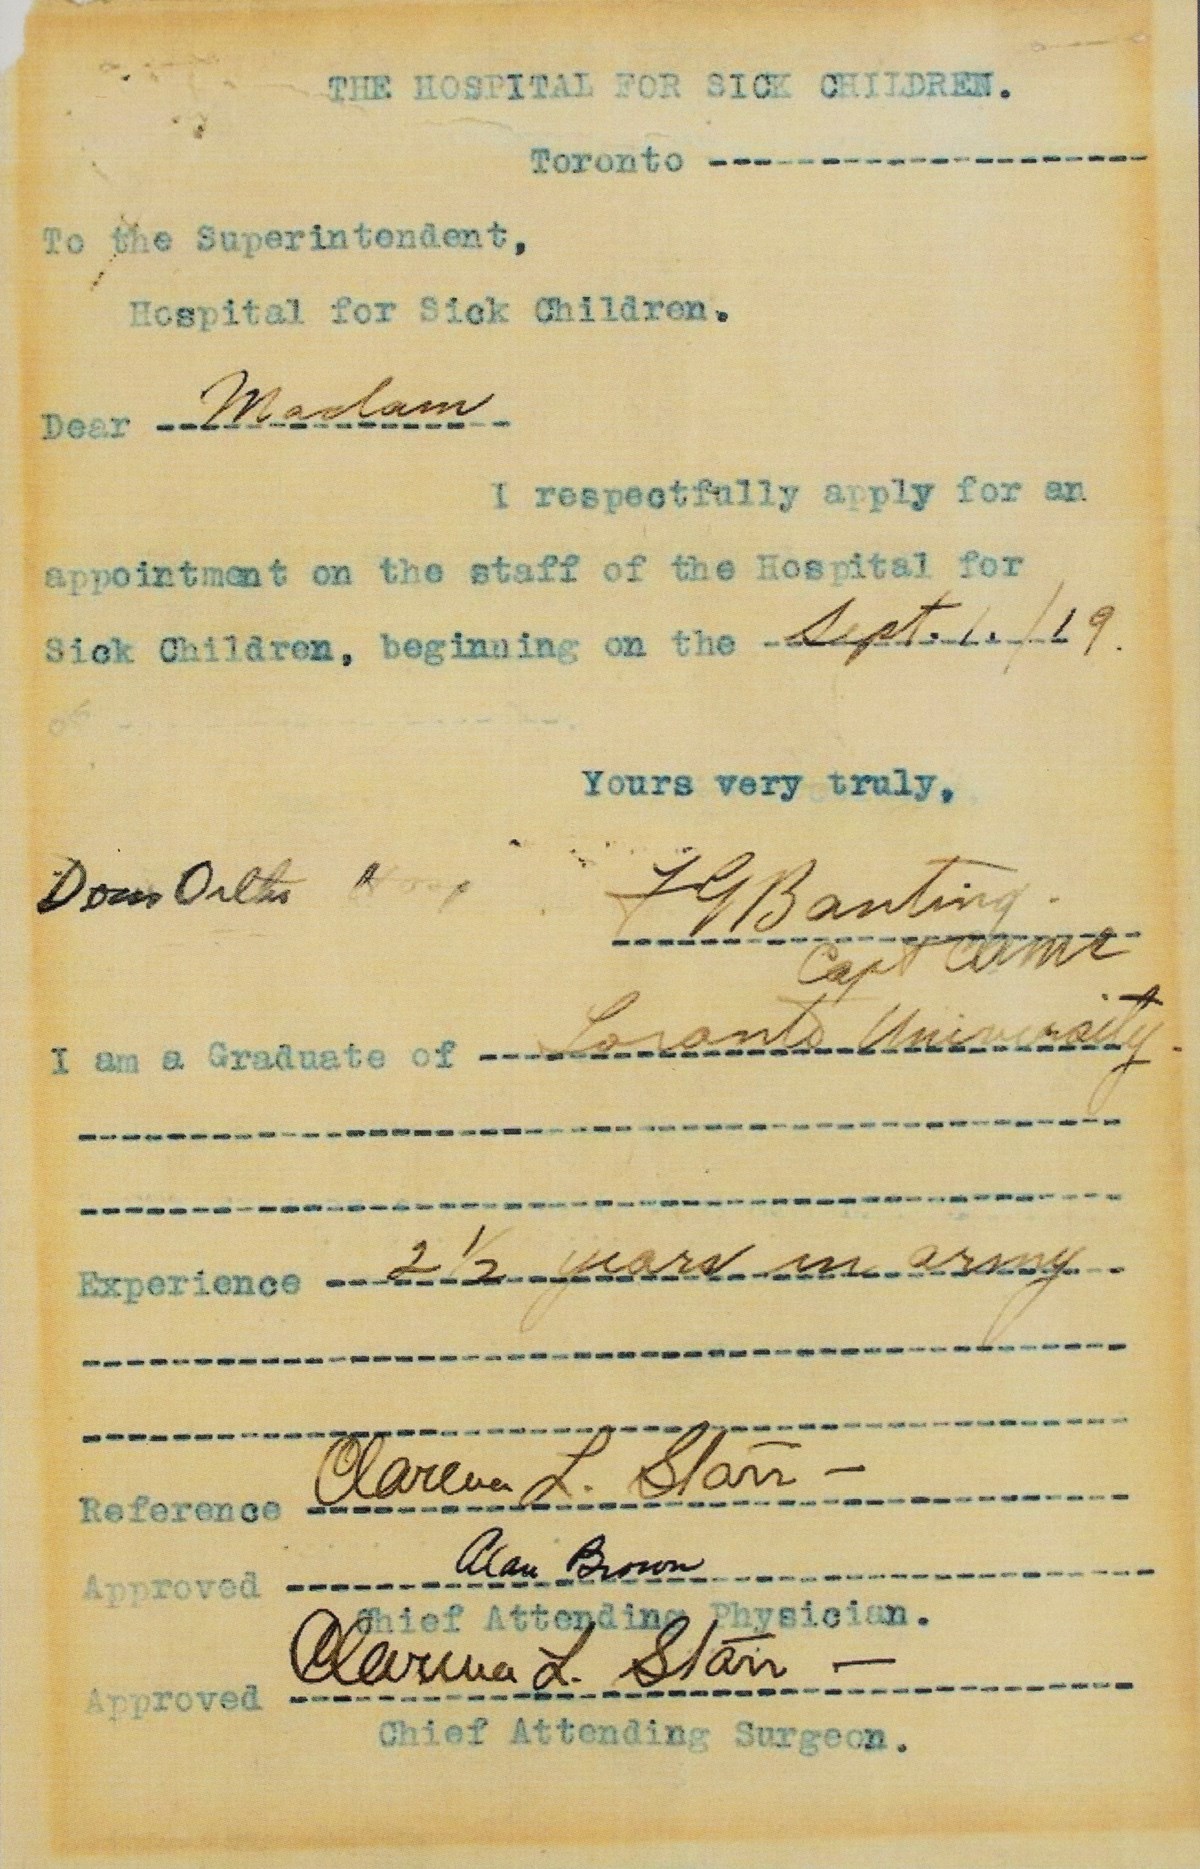 An aged yellow application form from Dr. Banting addressed to the Superintendent of The Hospital for Sick Children.